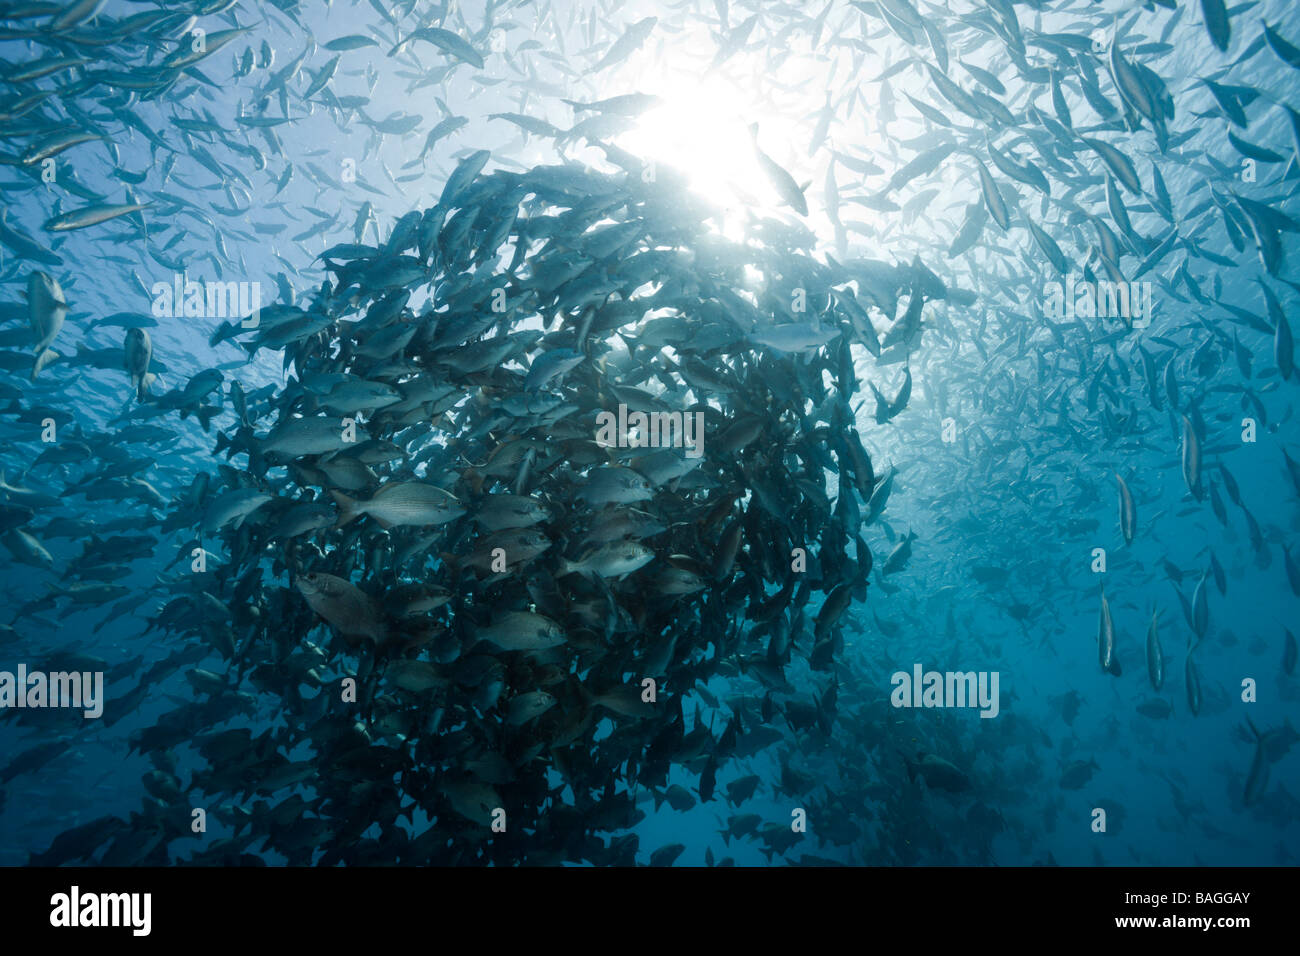 Shoal of Rudderfish laying Eggs in Open Water Kyphosus cinerascens German Channel Micronesia Palau Stock Photo